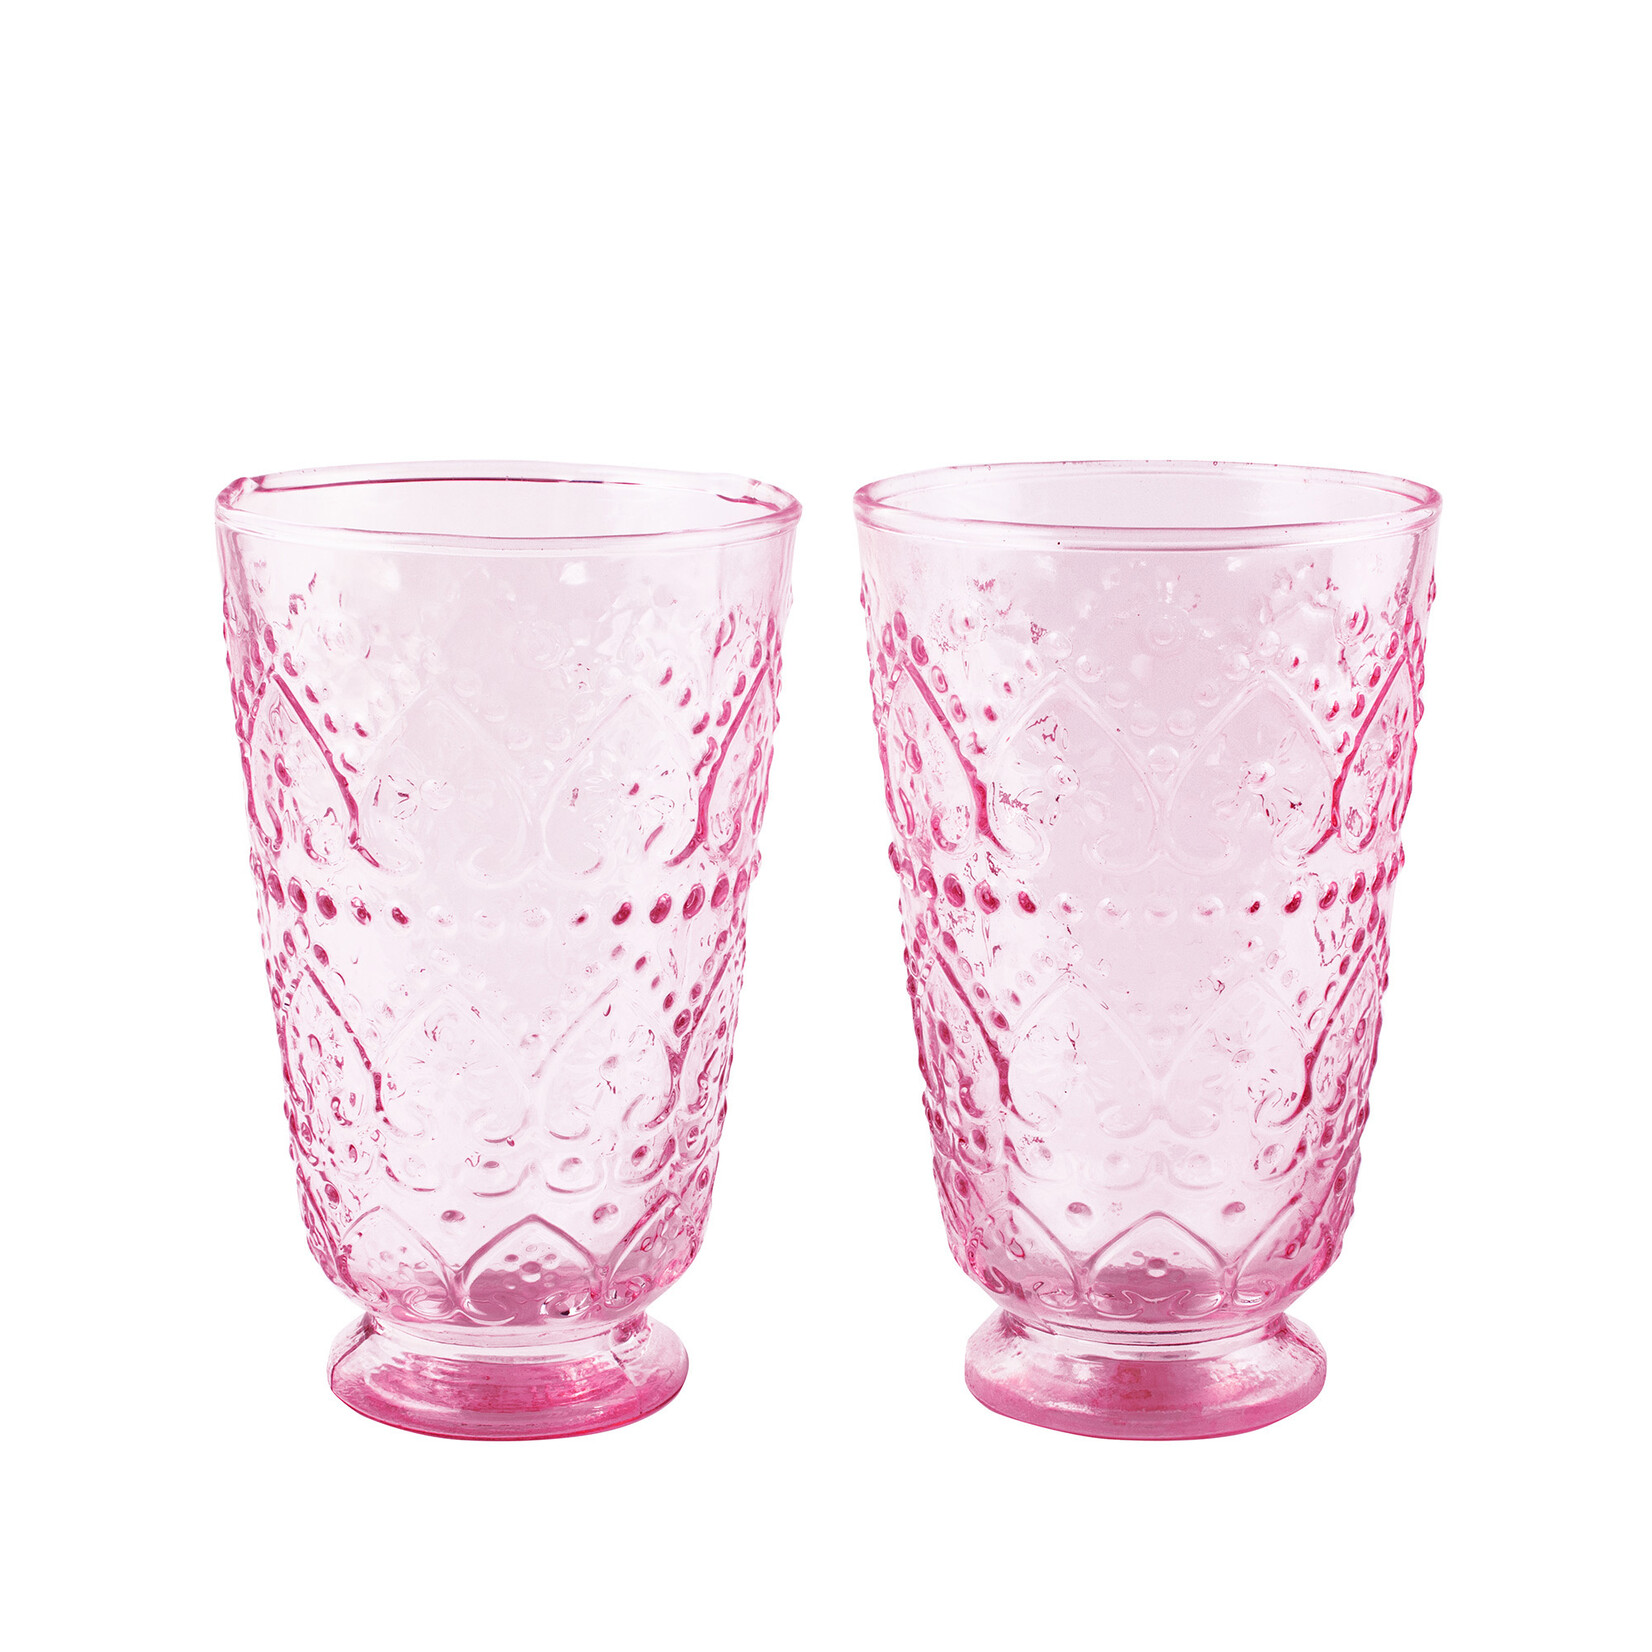 Lilly Pulitzer LILLY PULITZER GLASS SET, CONCH SHELL PINK